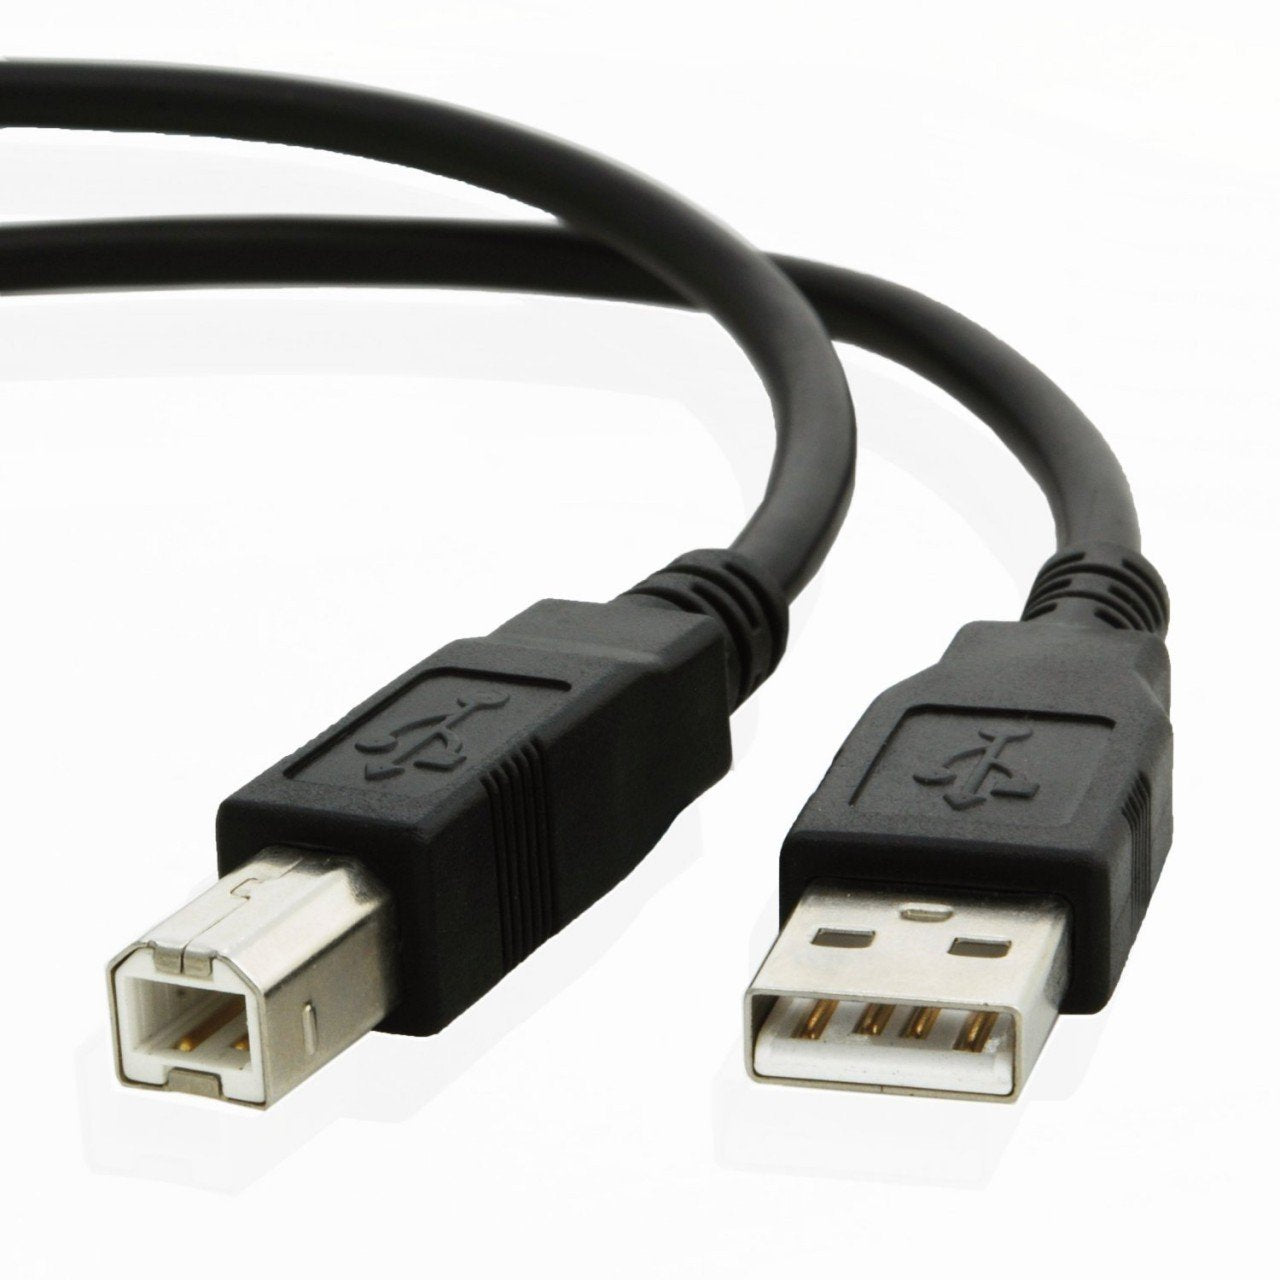 USB cable for Canon ISENSYS MF232w